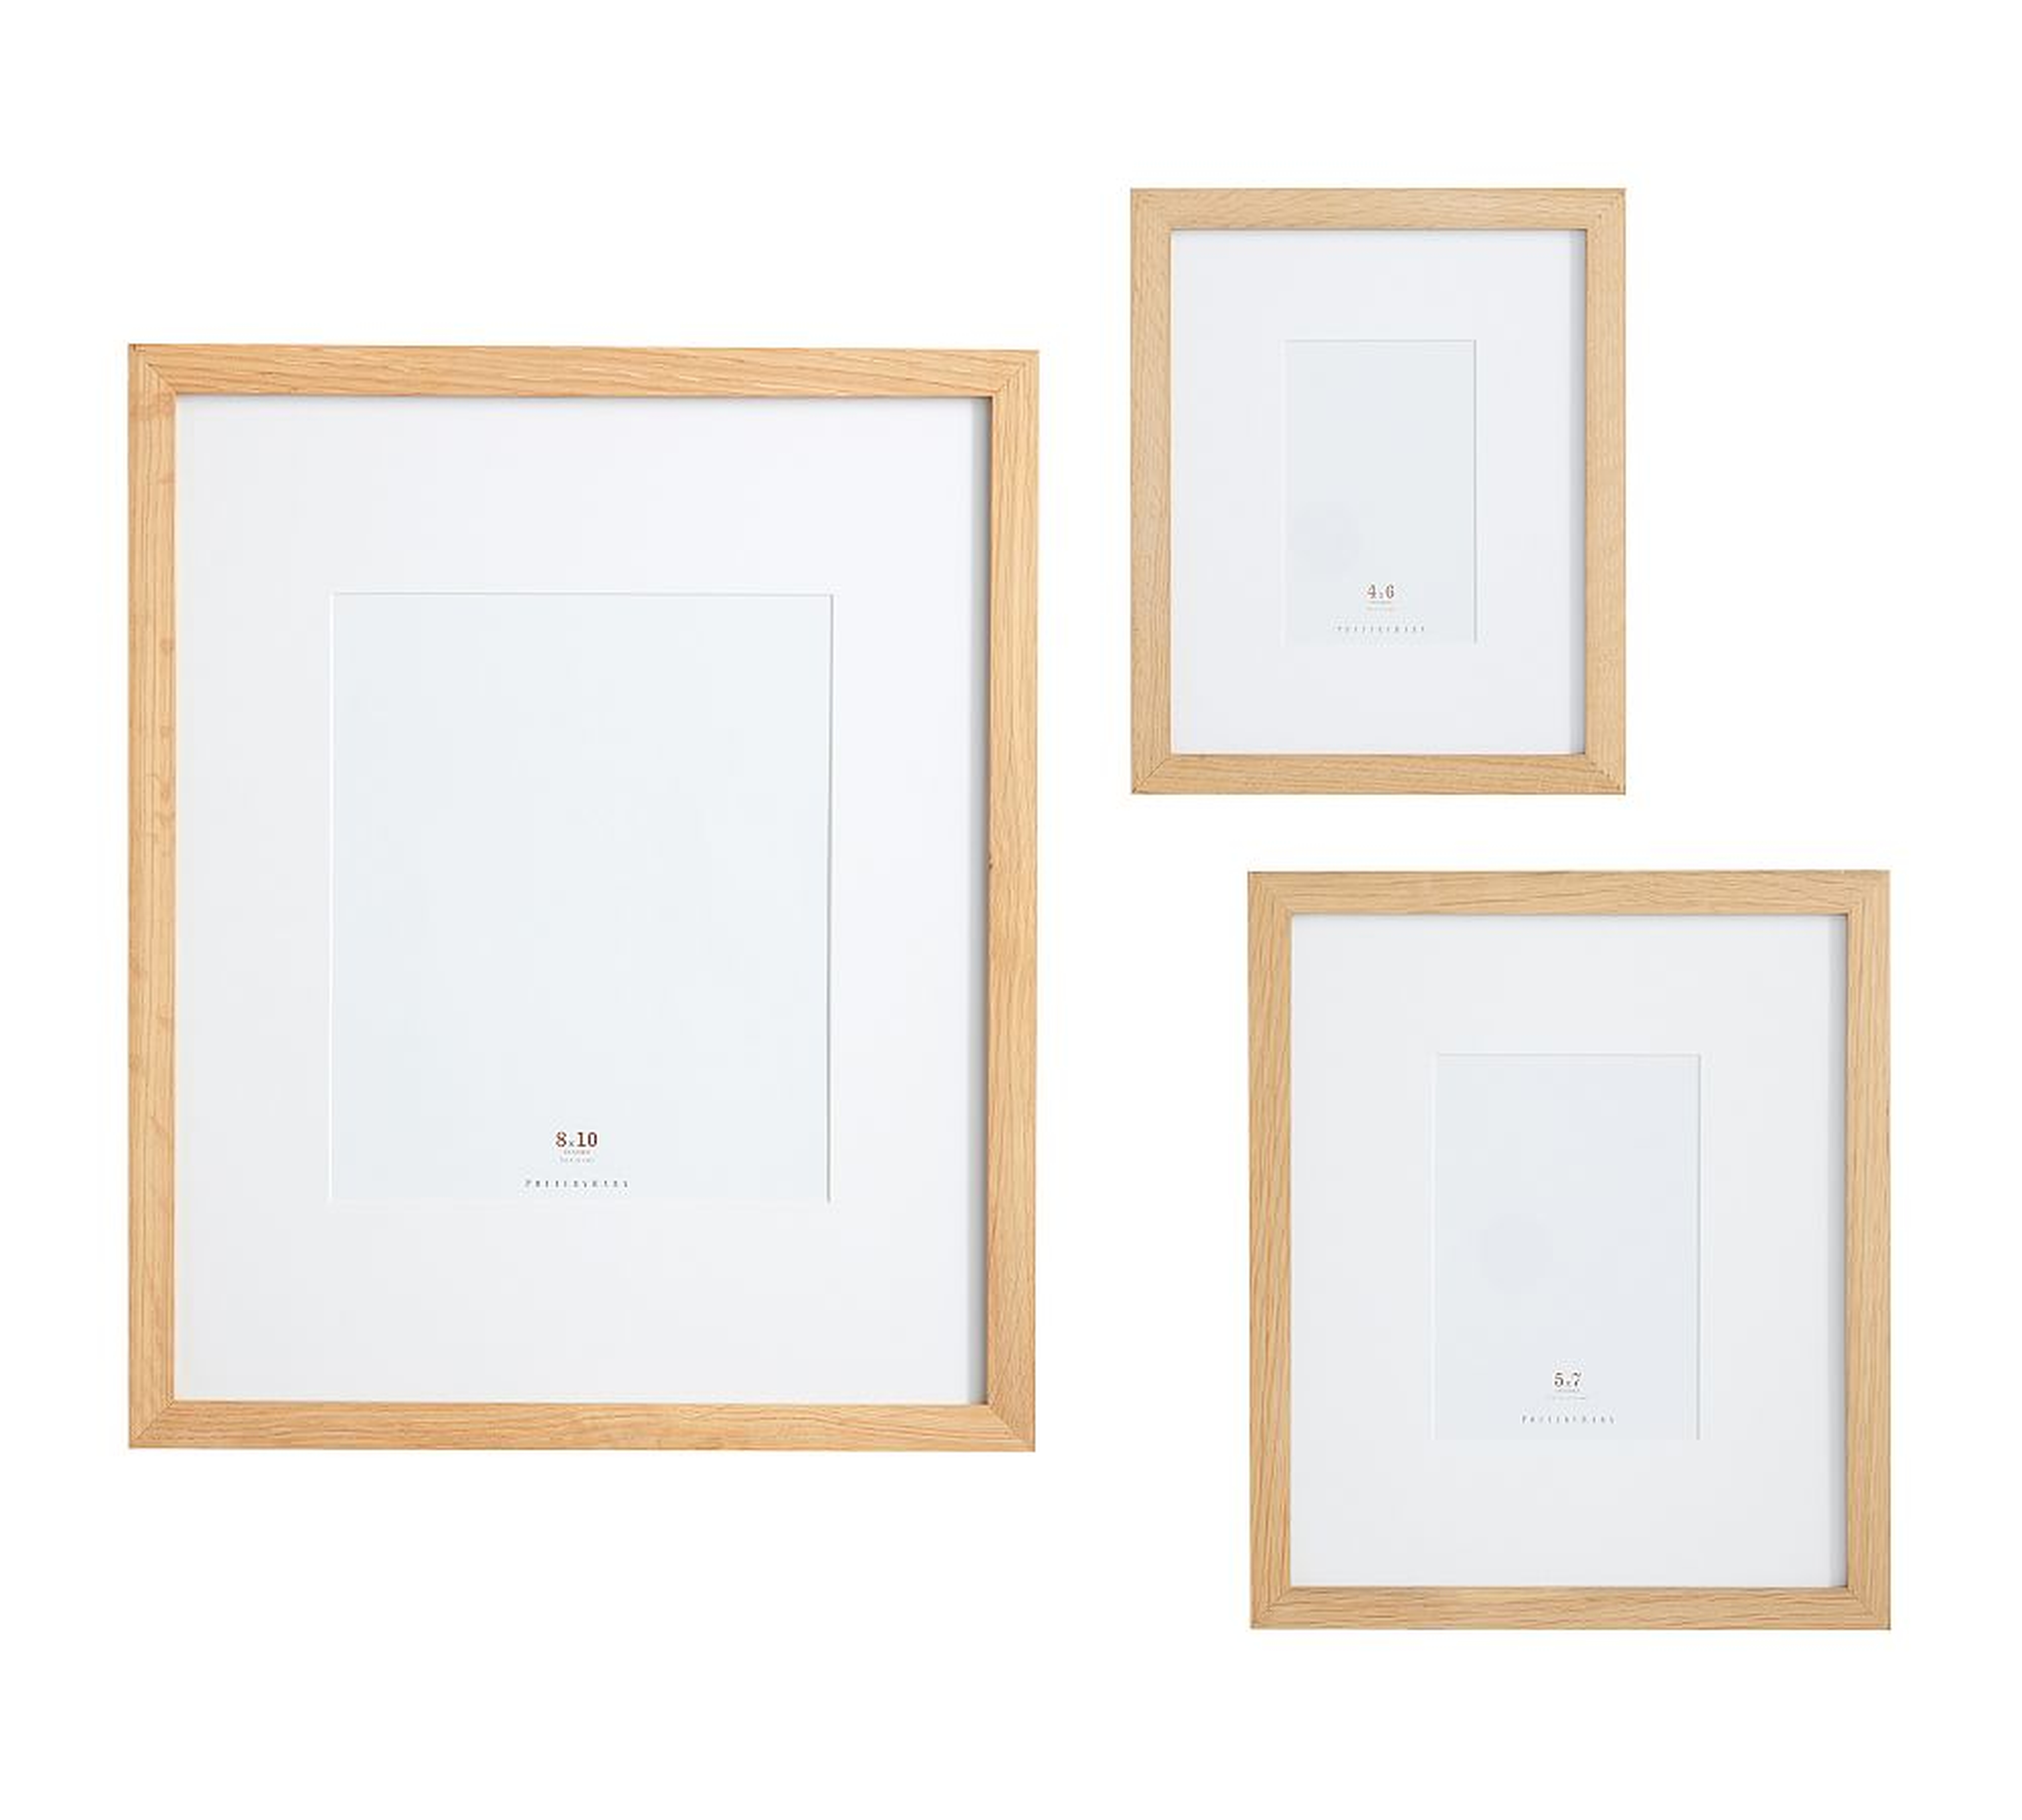 Wood Gallery Single Opening Frame - Set of 3 (includes 4x6, 5x7, 8x10) - White - Pottery Barn